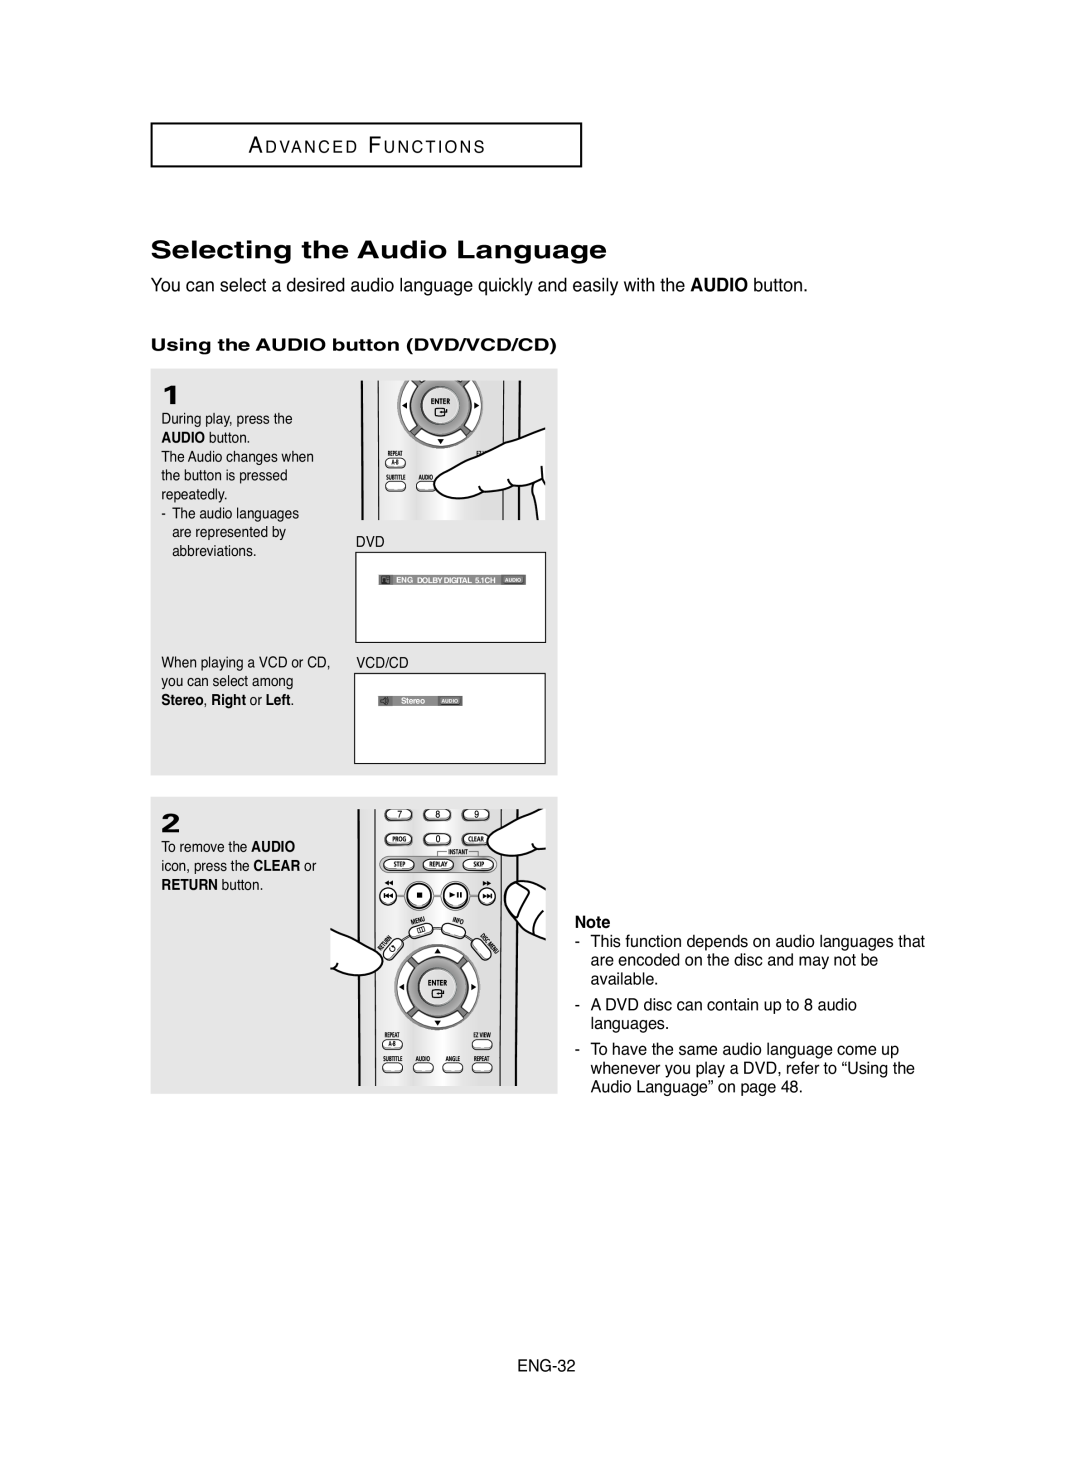 Samsung DVD-HD755 manual Selecting the Audio Language, Using the AUDIO button DVD/VCD/CD 